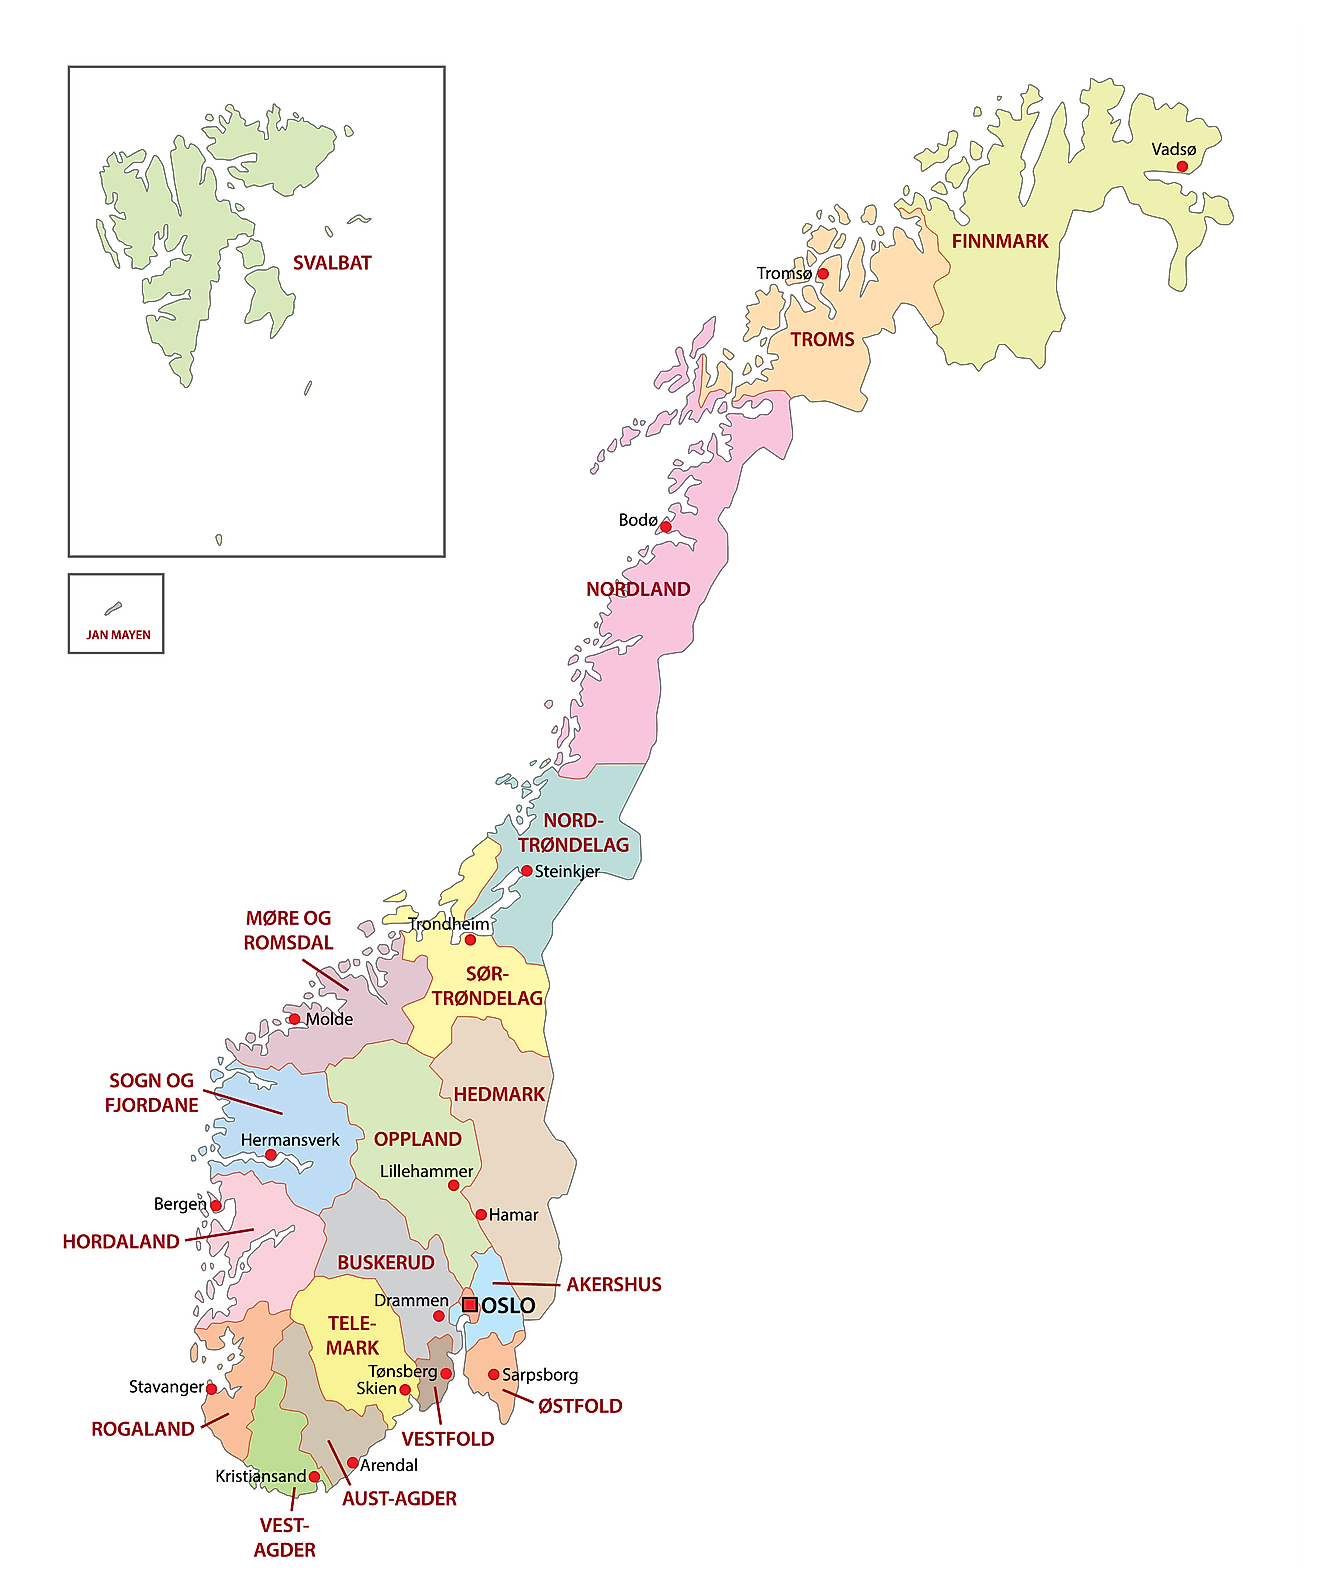 Political Map of Norway showing its 11 regions and the capital city of Oslo.